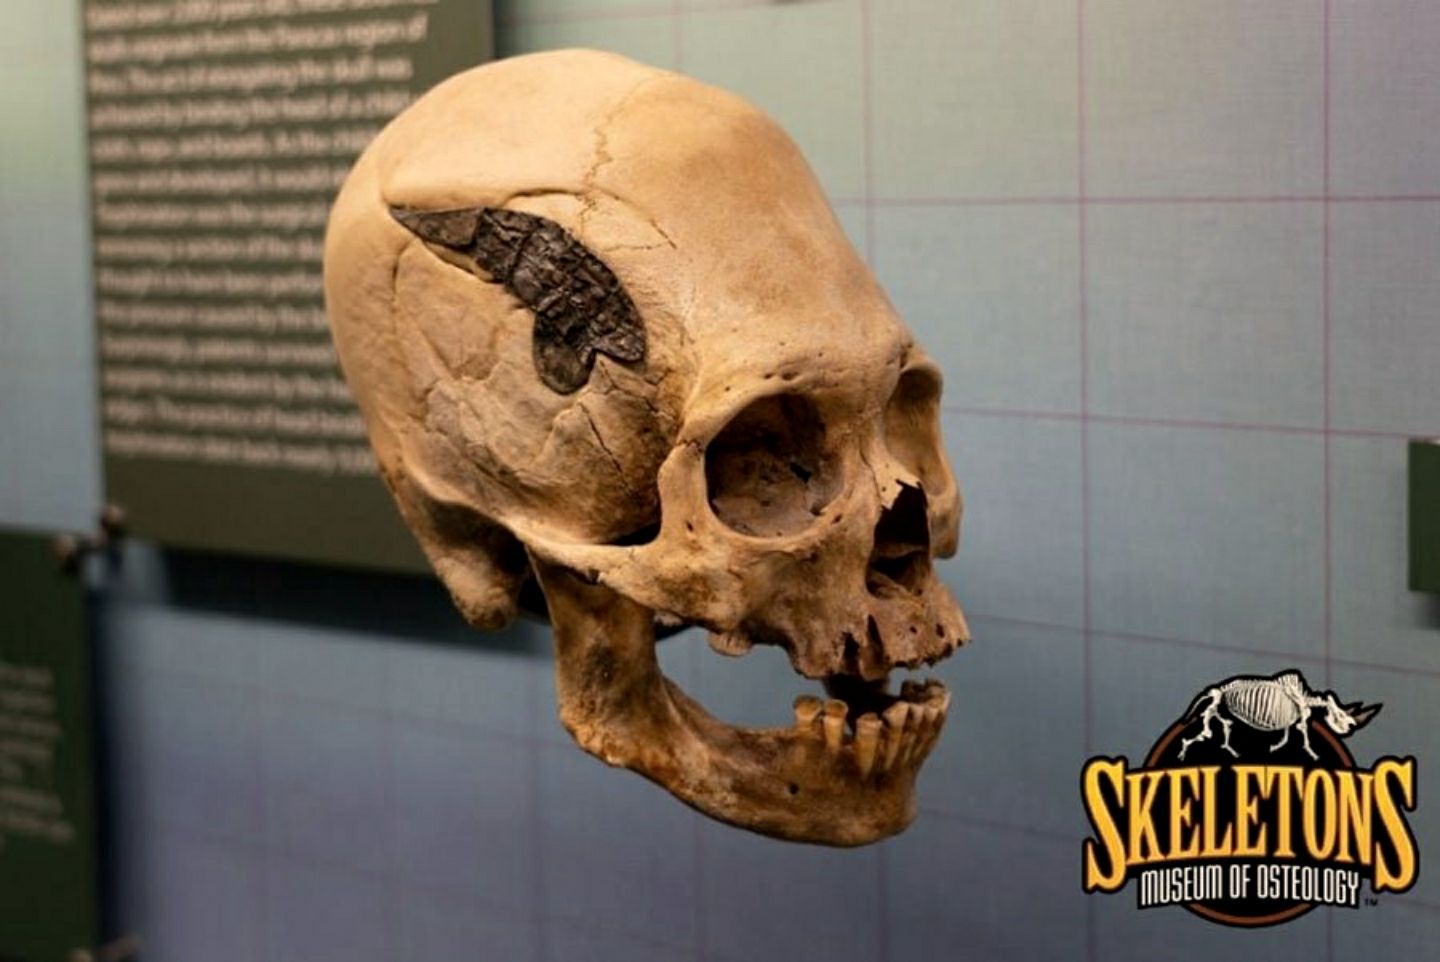 This skull from Peru has a metal implant. If it is authentic then it would be a potentially unique find from the ancient Andes.